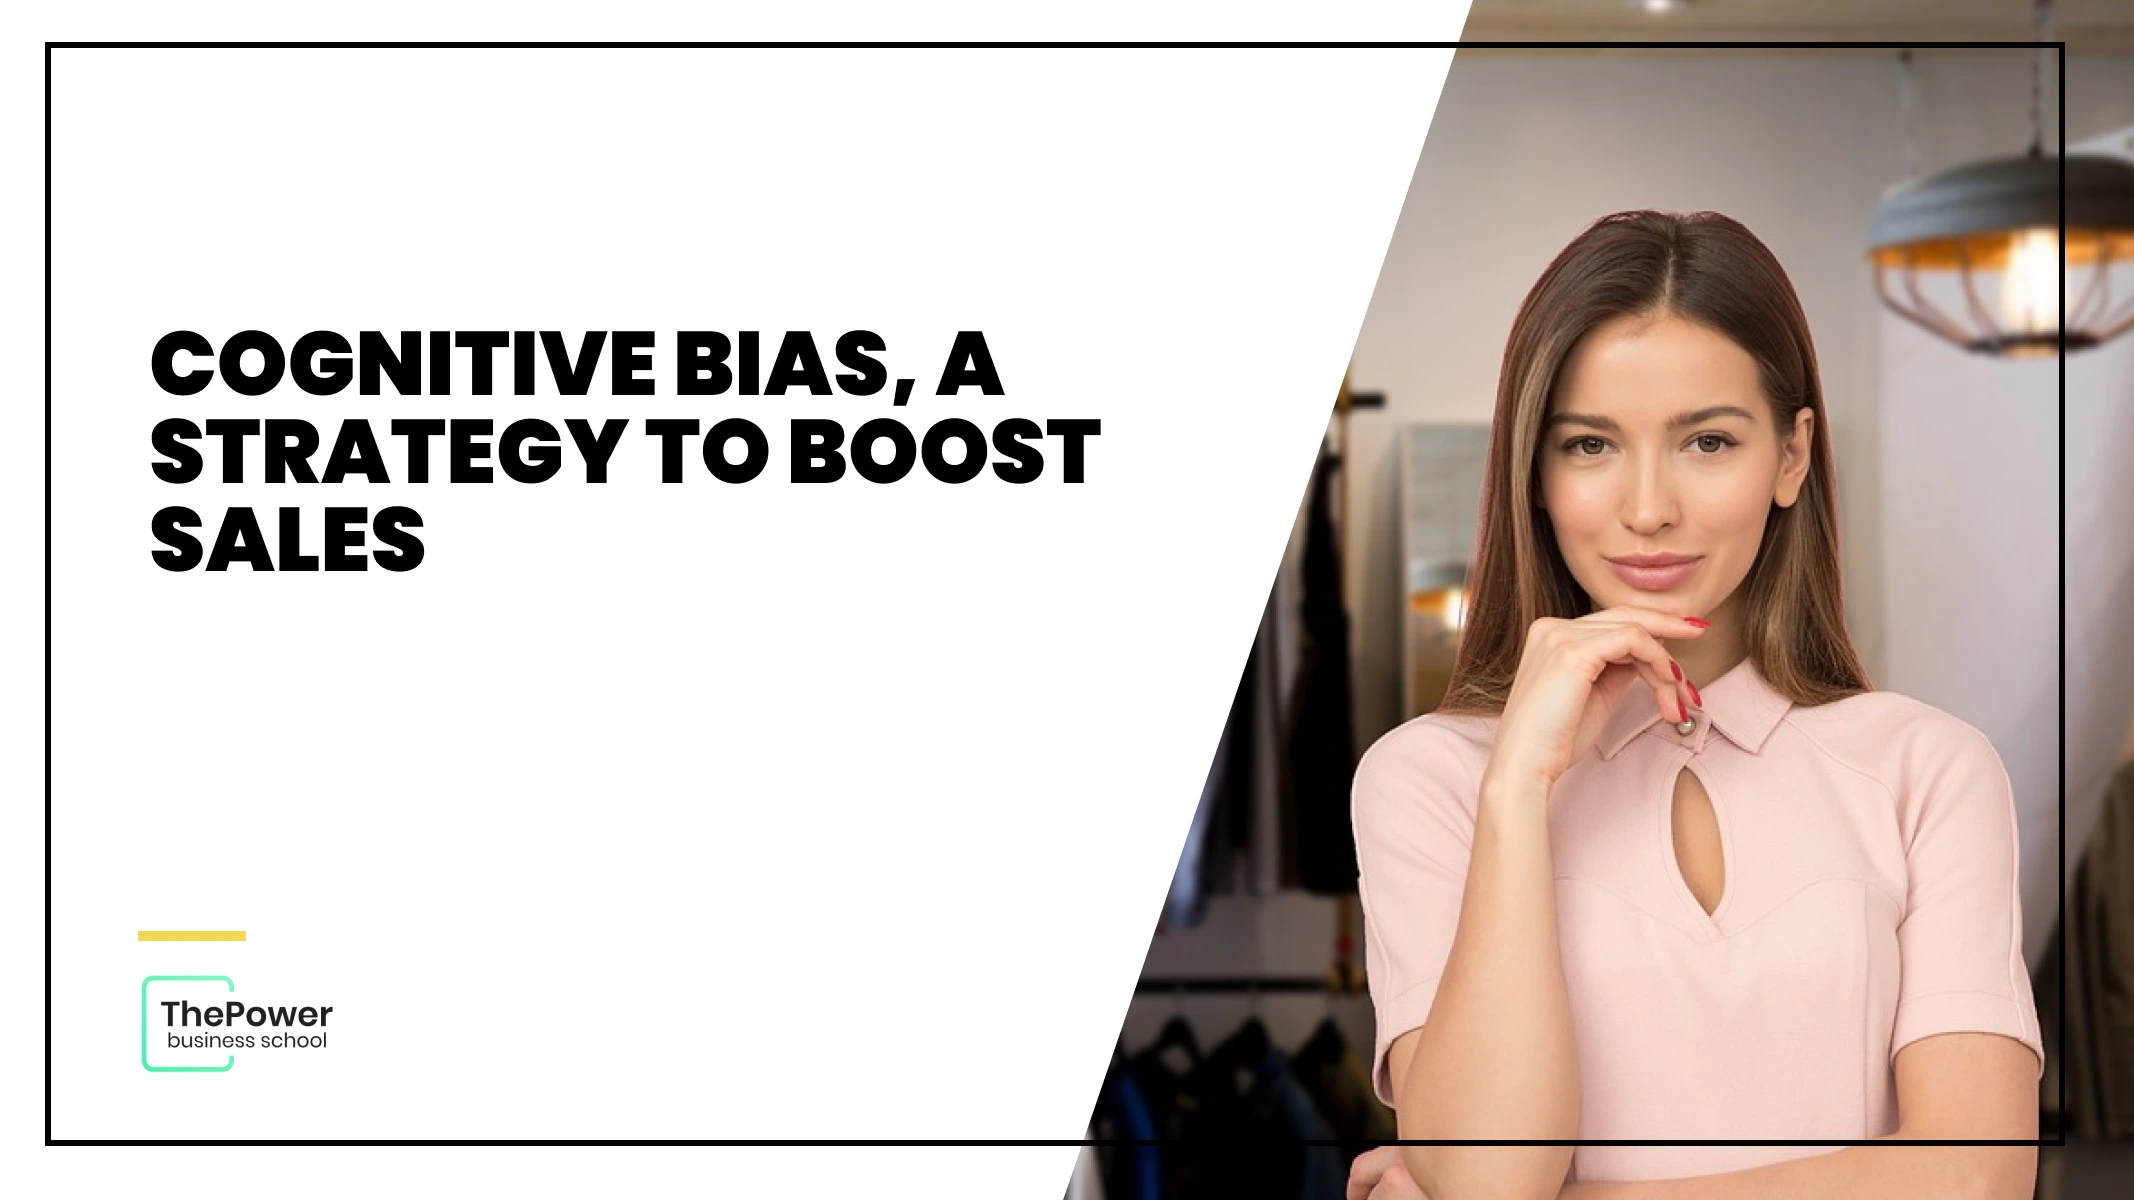 Cognitive bias, a strategy to boost sales